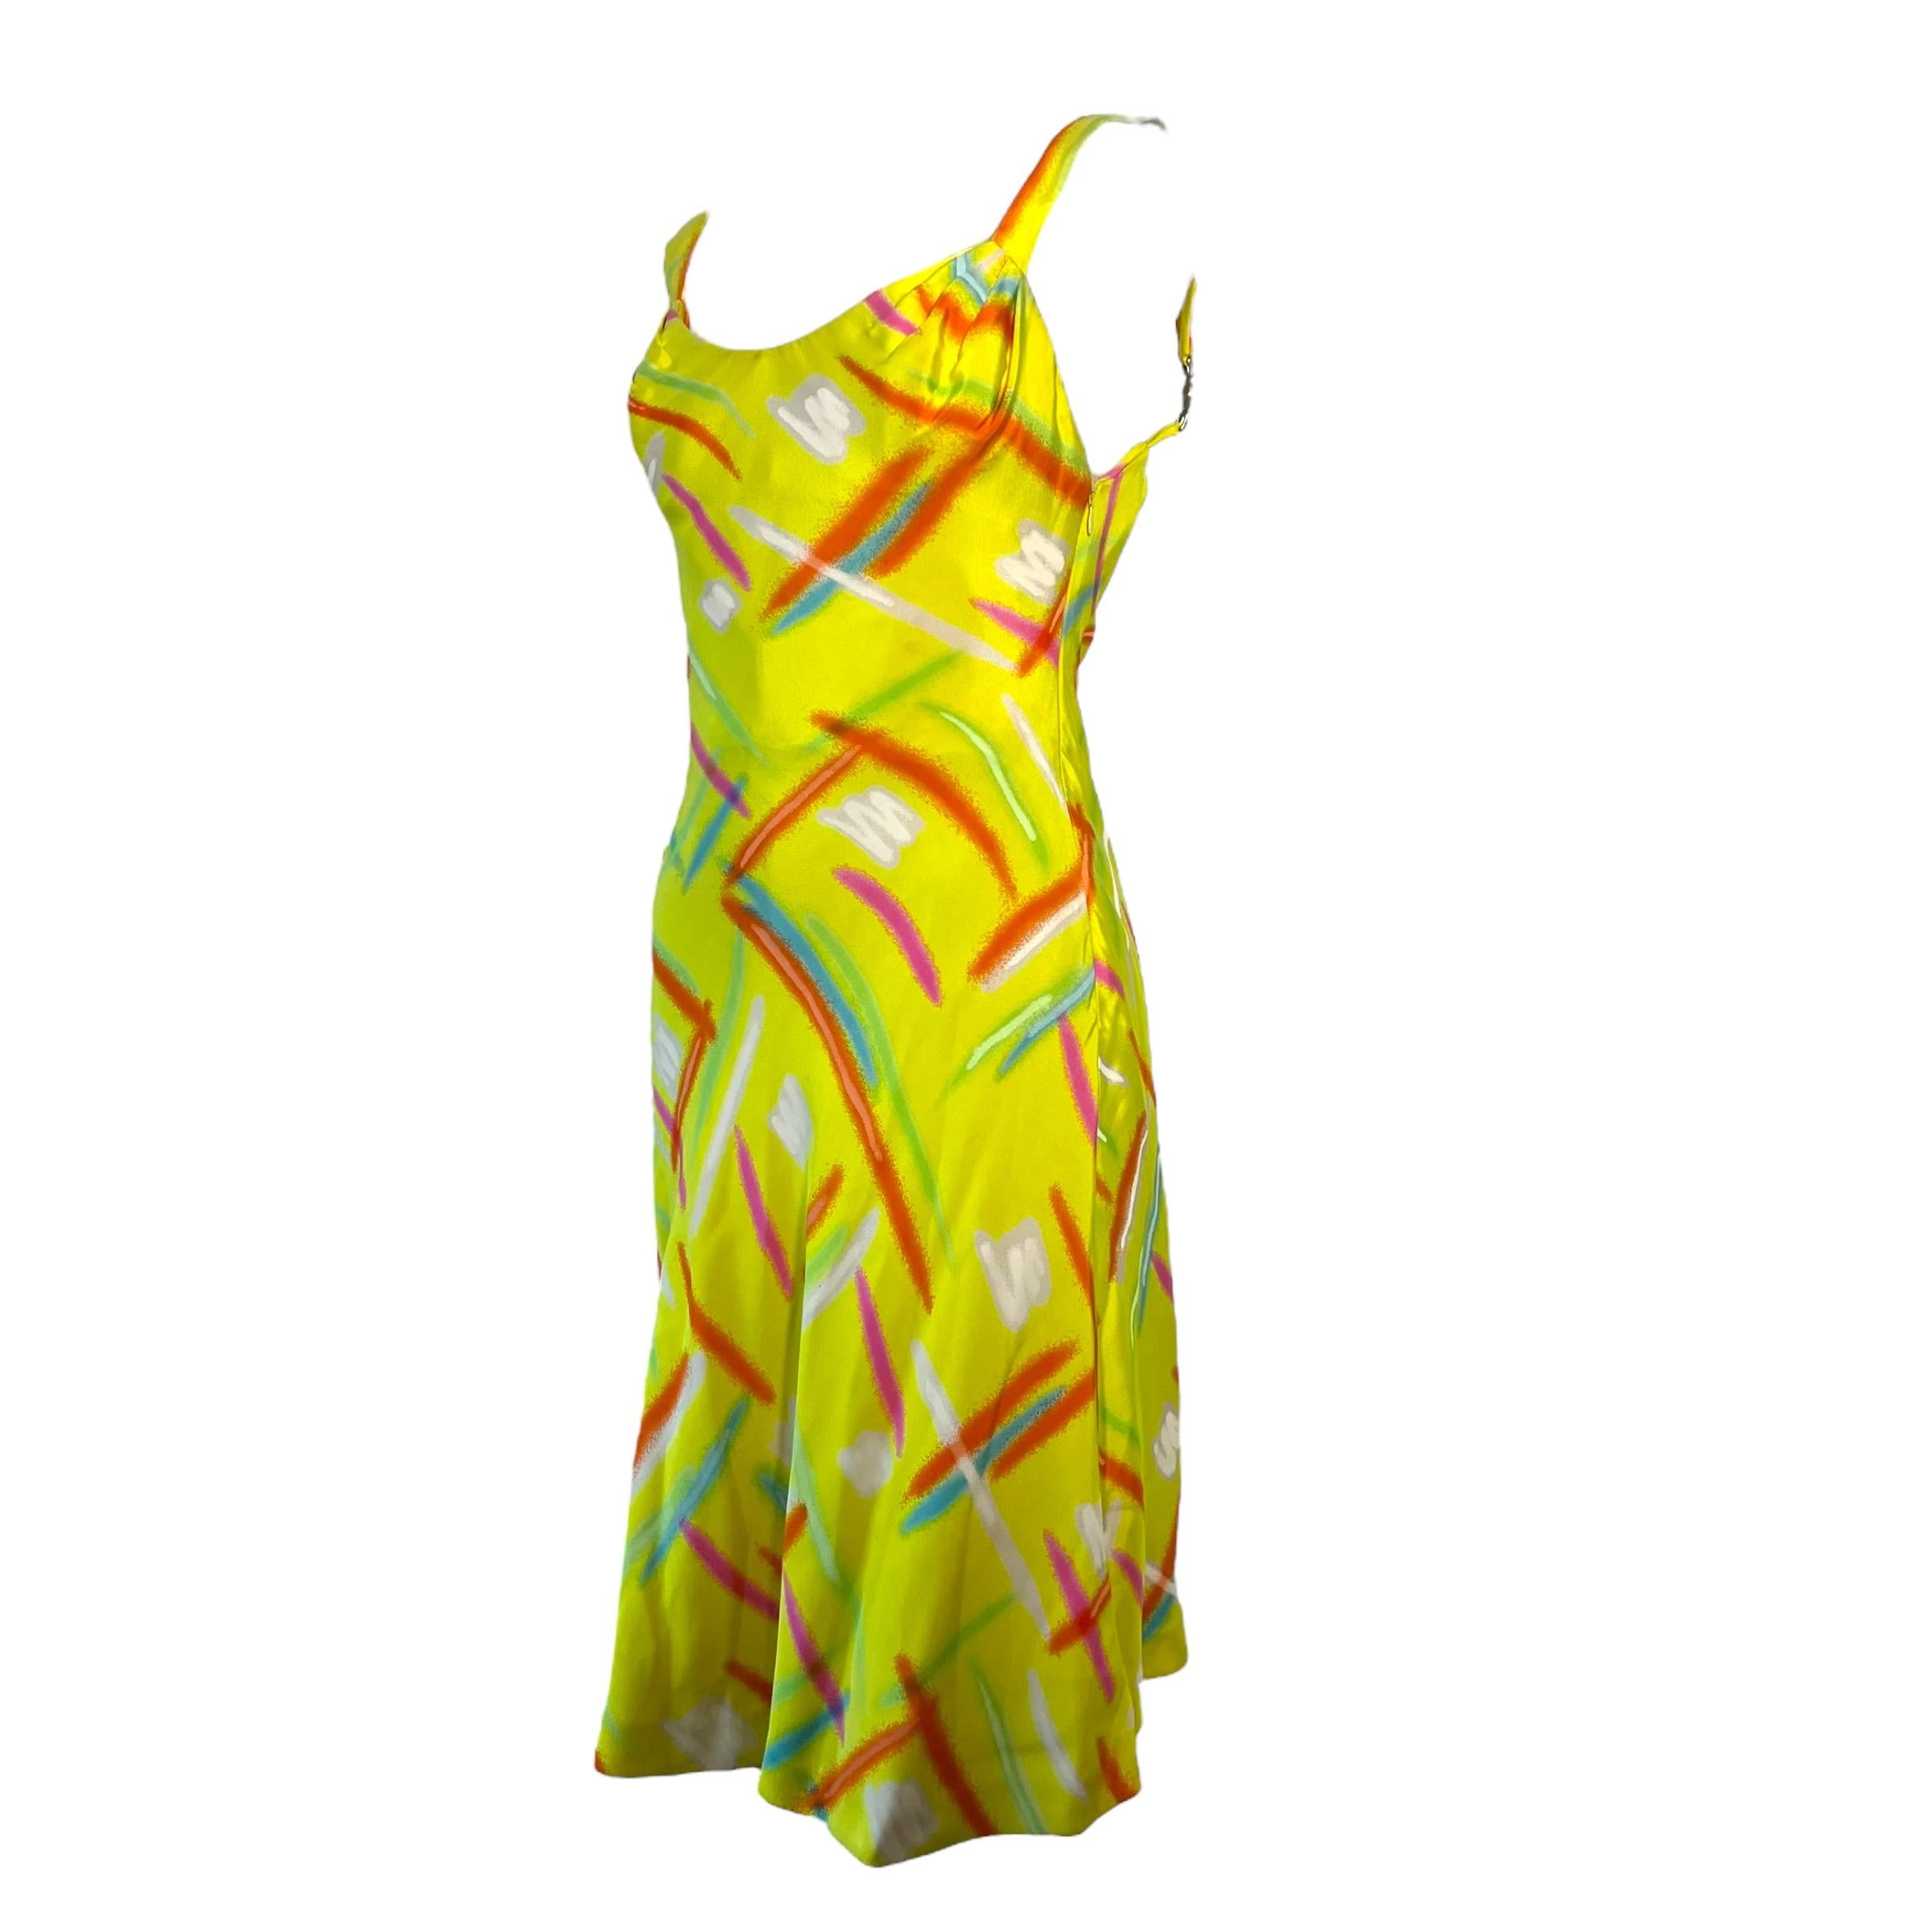 

Runway collection dress from Gianni Versace Dress. This bright yellow dress shows neon strikes all over and has iconic Medusa hardware at the straps.

Size: IT42, circa S-M

Condition: 9/10